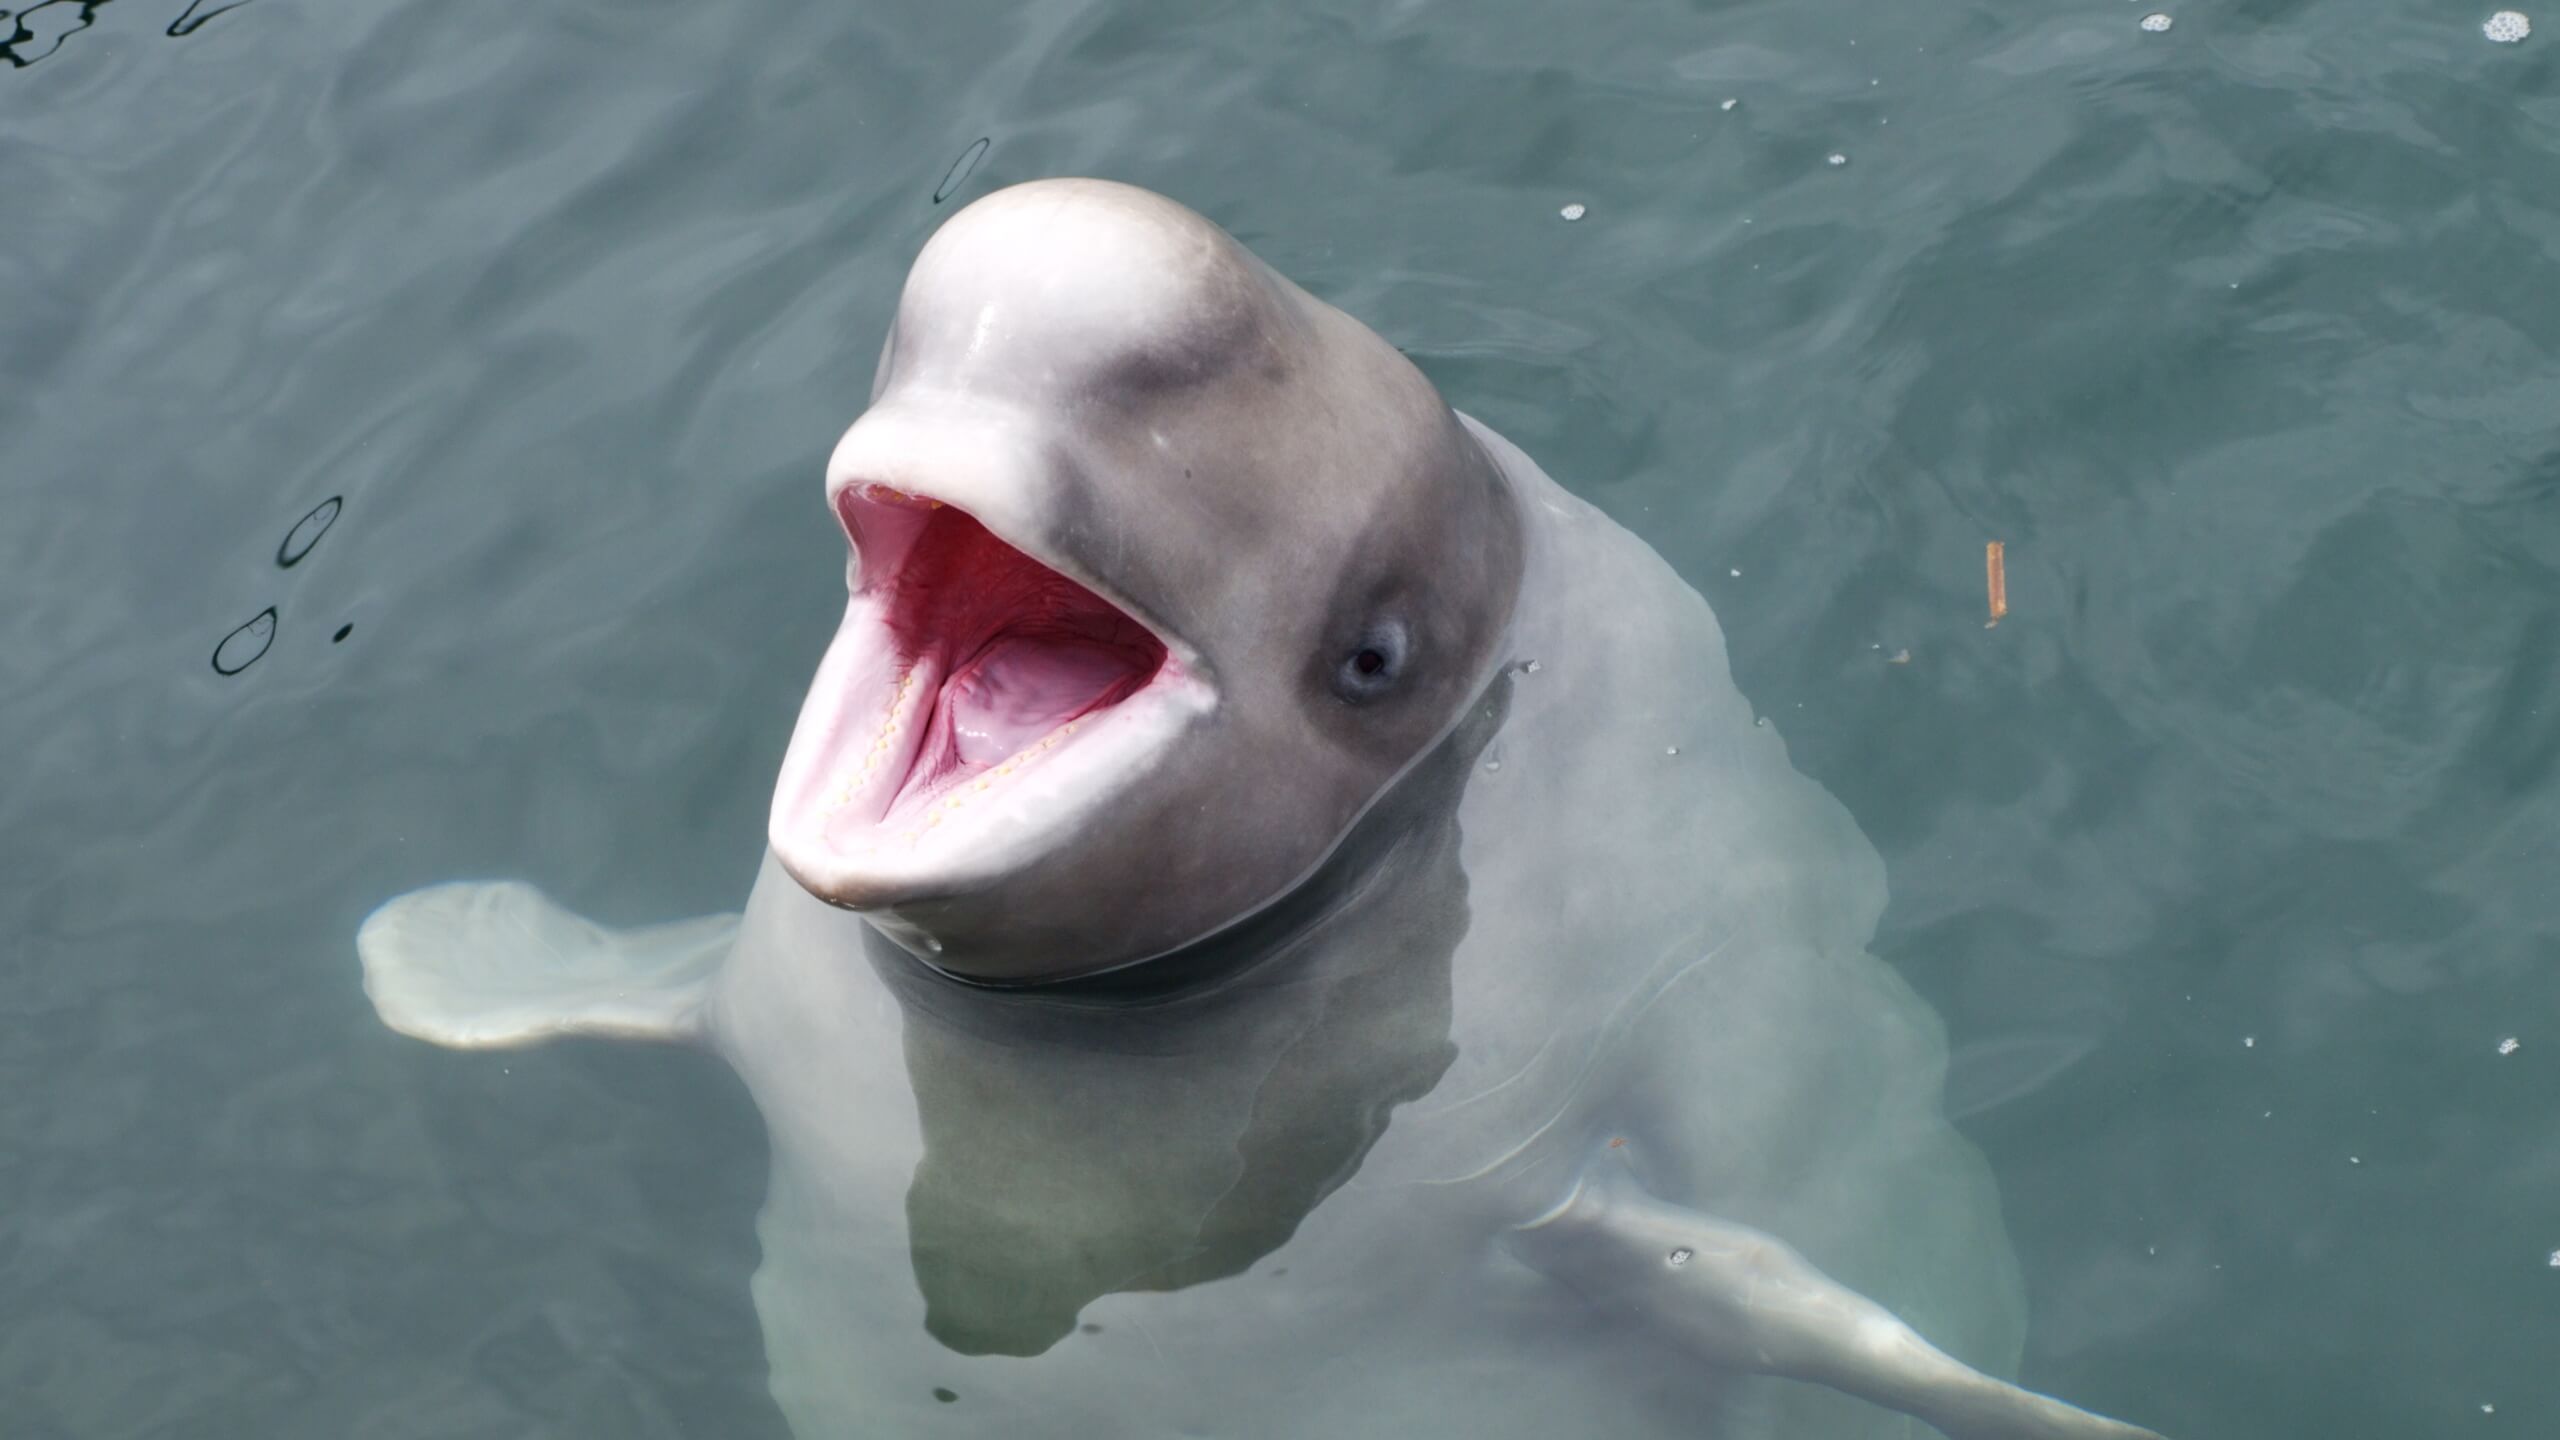 They have also been known to attack boats that come too close to them, so it is important for people who encounter belugas in the wild to maintain a respectful distance. Overall though, these intelligent animals tend not display violent tendencies unless provoked or threatened by humans or other predators.